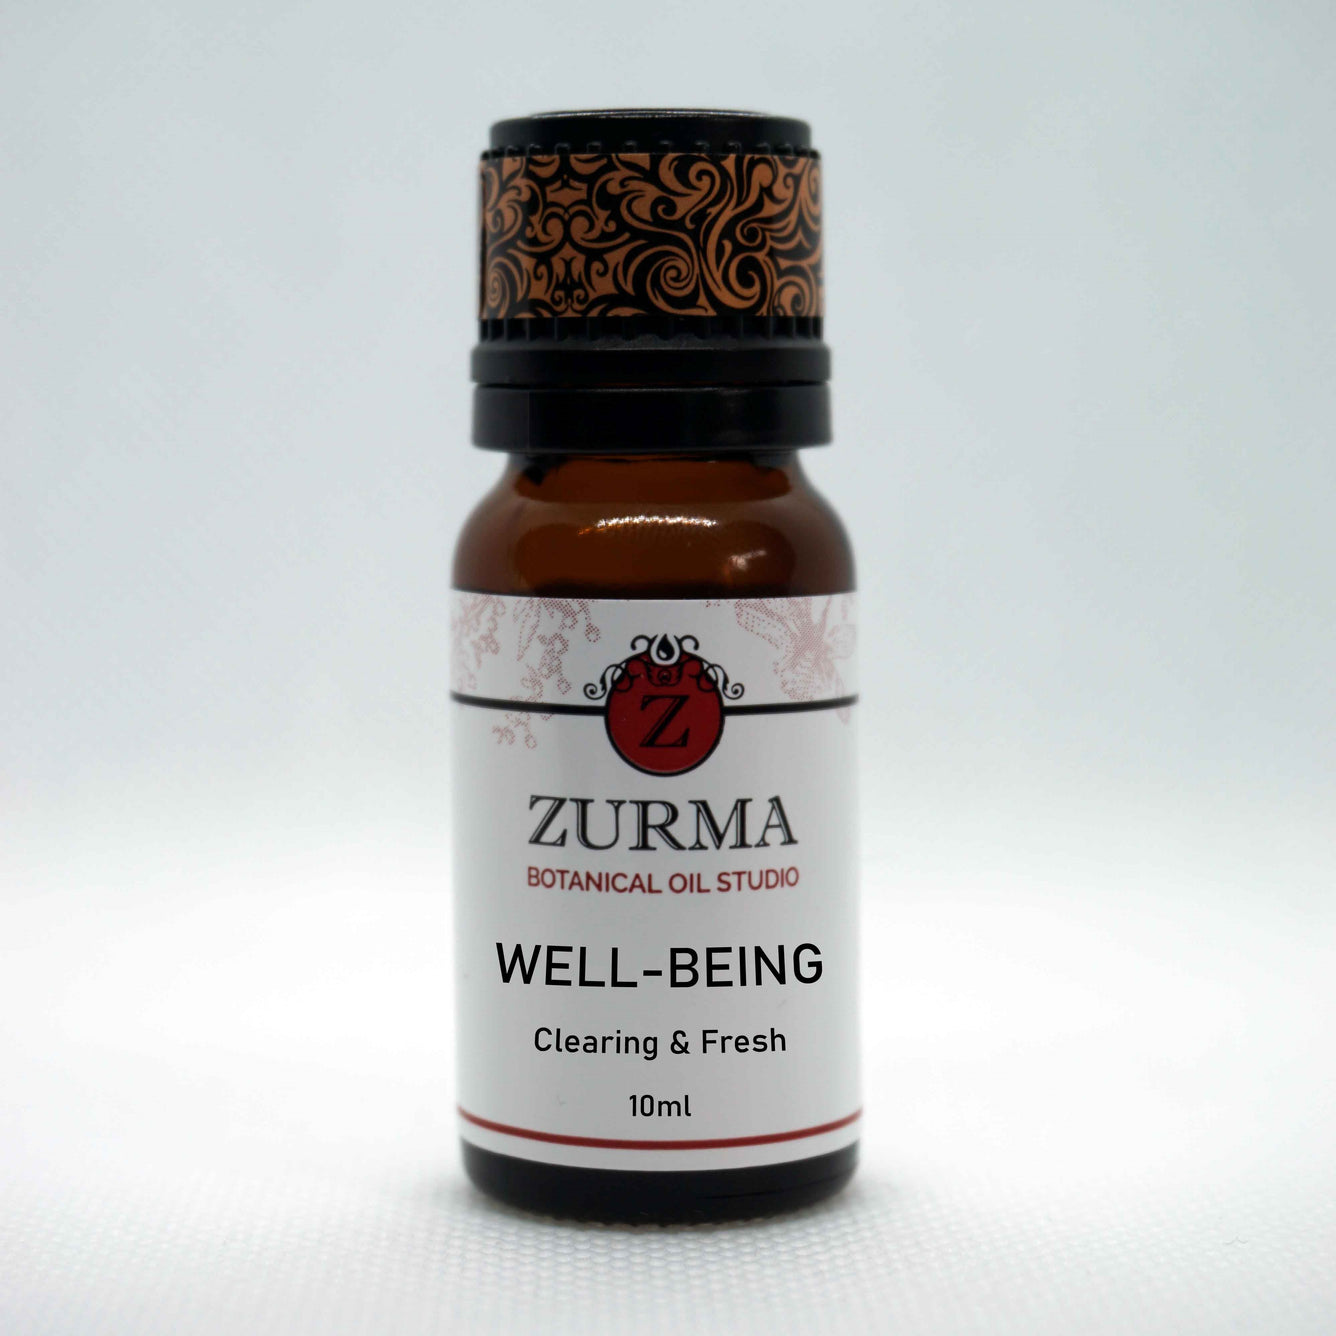 Well-Being Essential Oil Blend